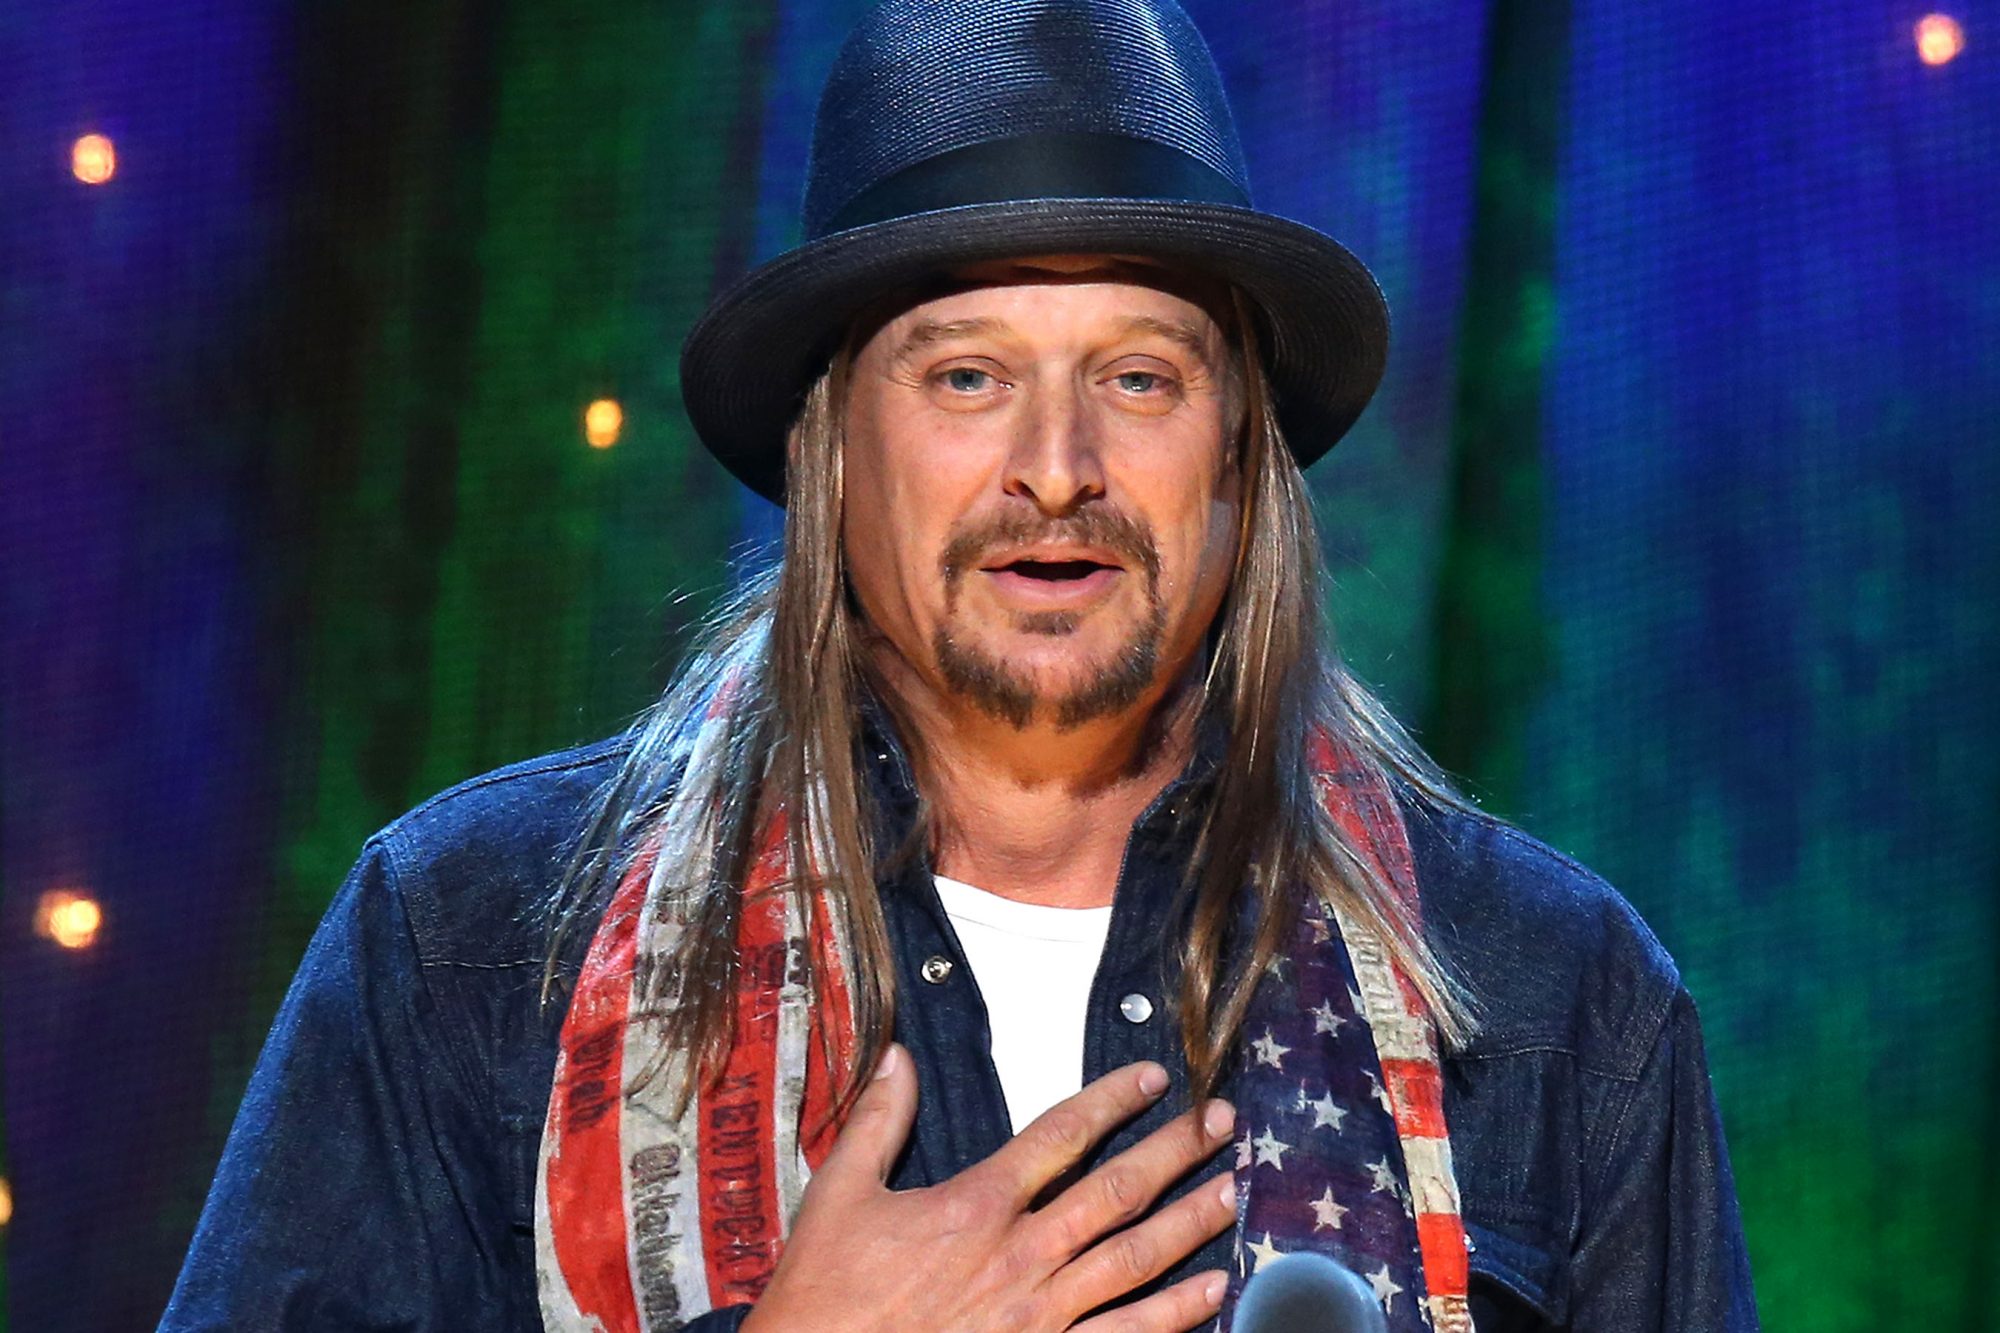 Desperate to Stem Market Share Losses, Anheuser-Busch Names Kid Rock Chairman and CEO